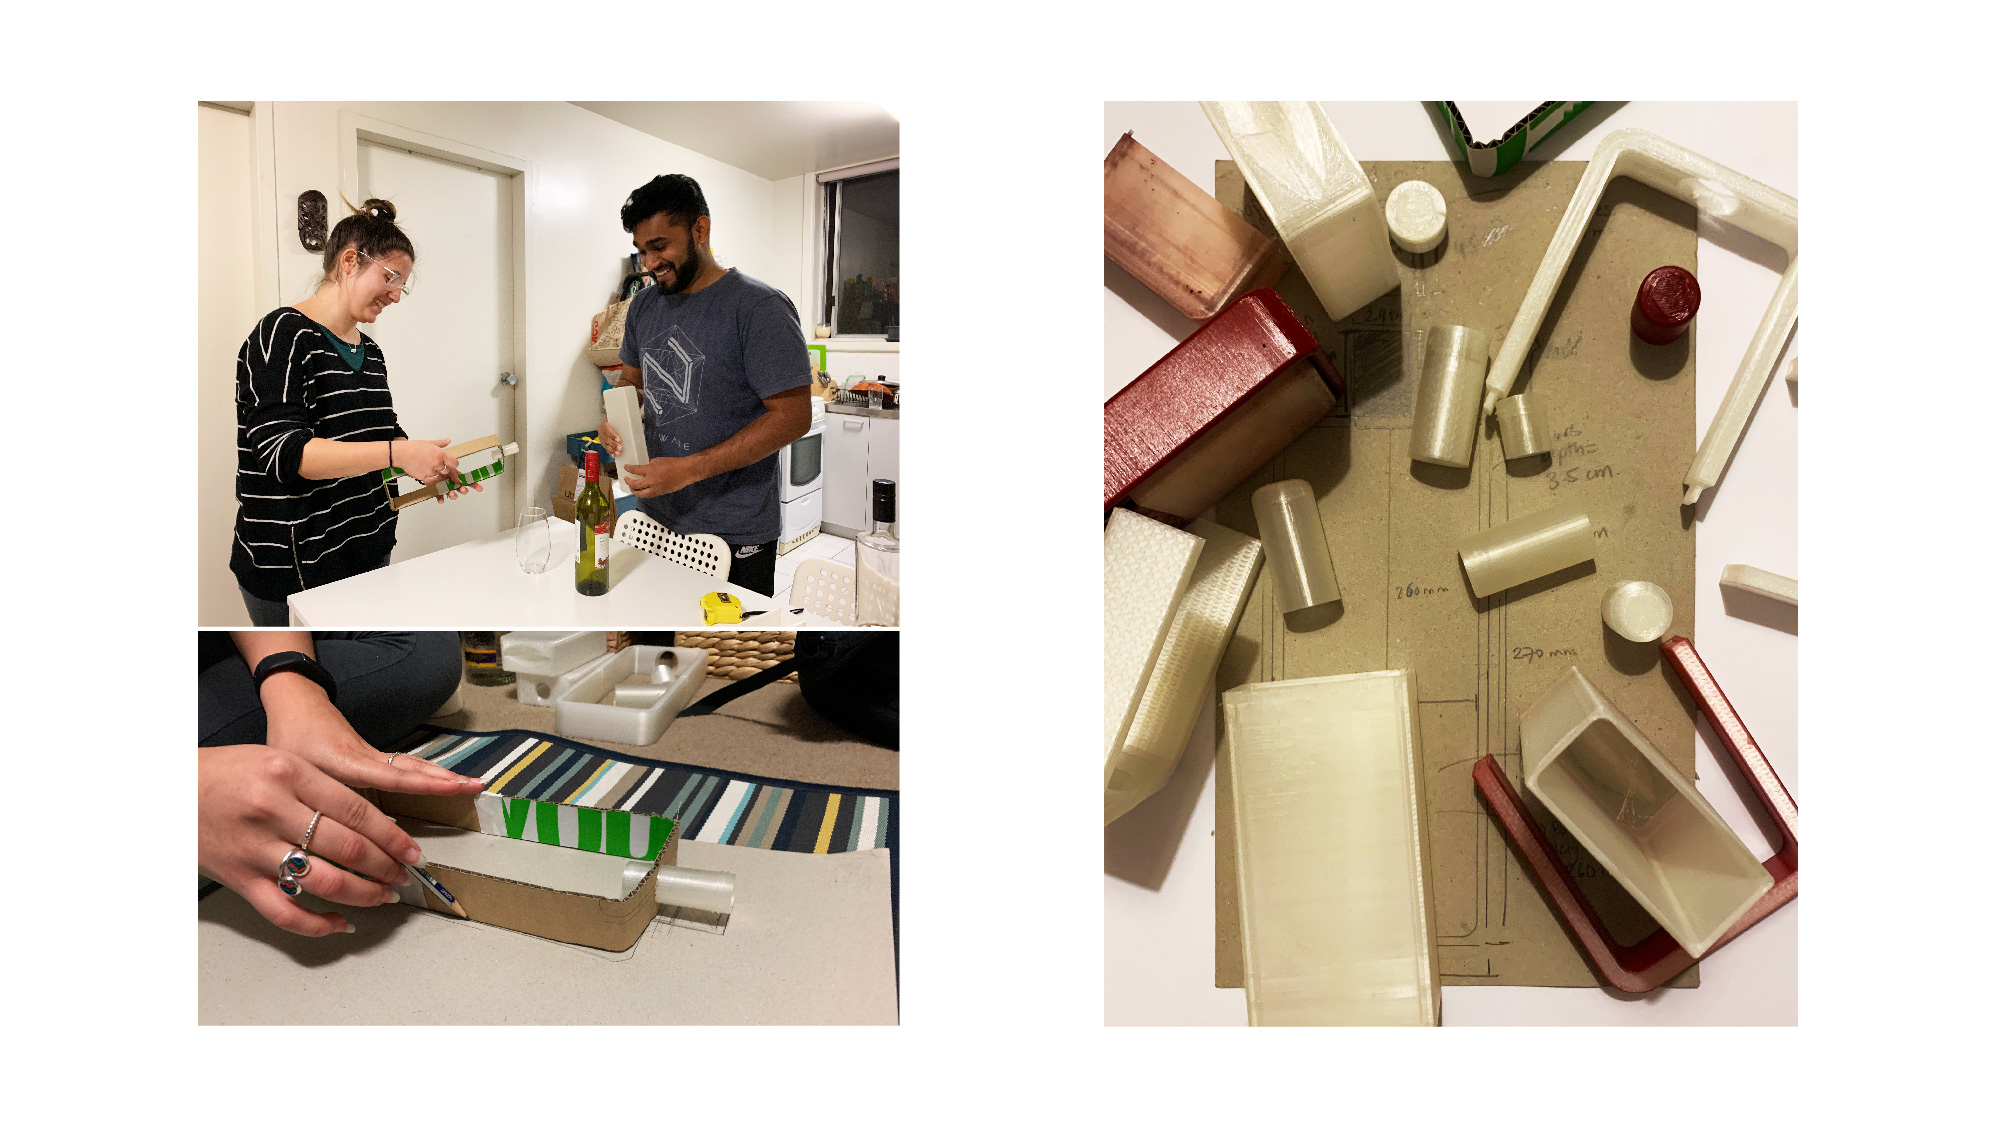 Design process involved moving between full-size drawings, cardboard prototypes, and 3D prints.